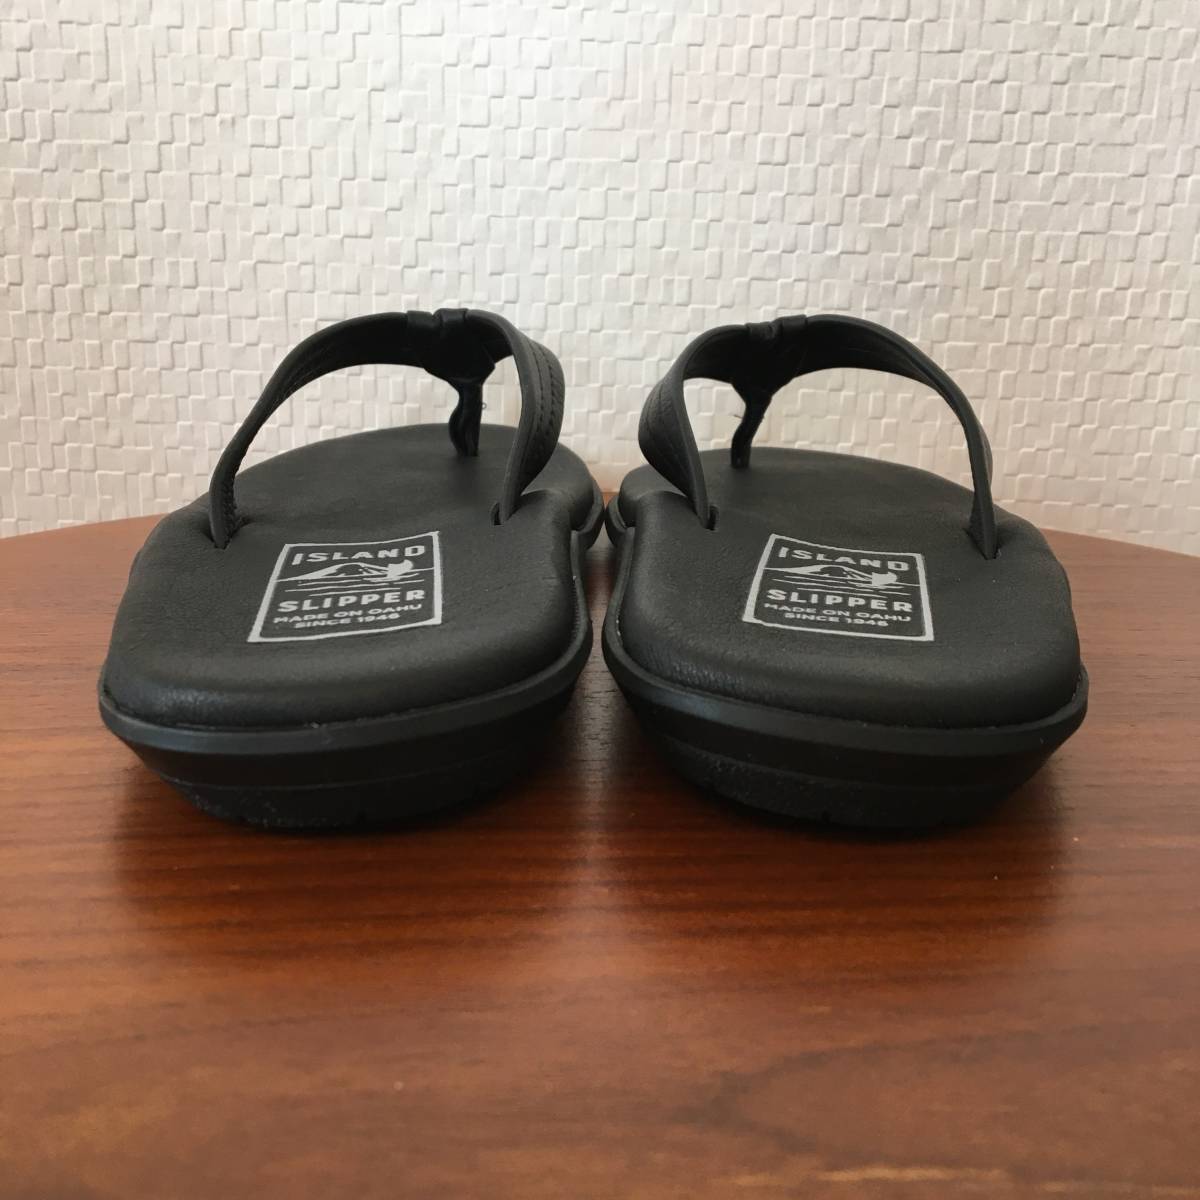 26.0cm(US 8)l ISLAND SLIPPER Islay ndo slippers PB202 sandals black black smooth leather Hawaii or f( new goods )( prompt decision )( regular goods )